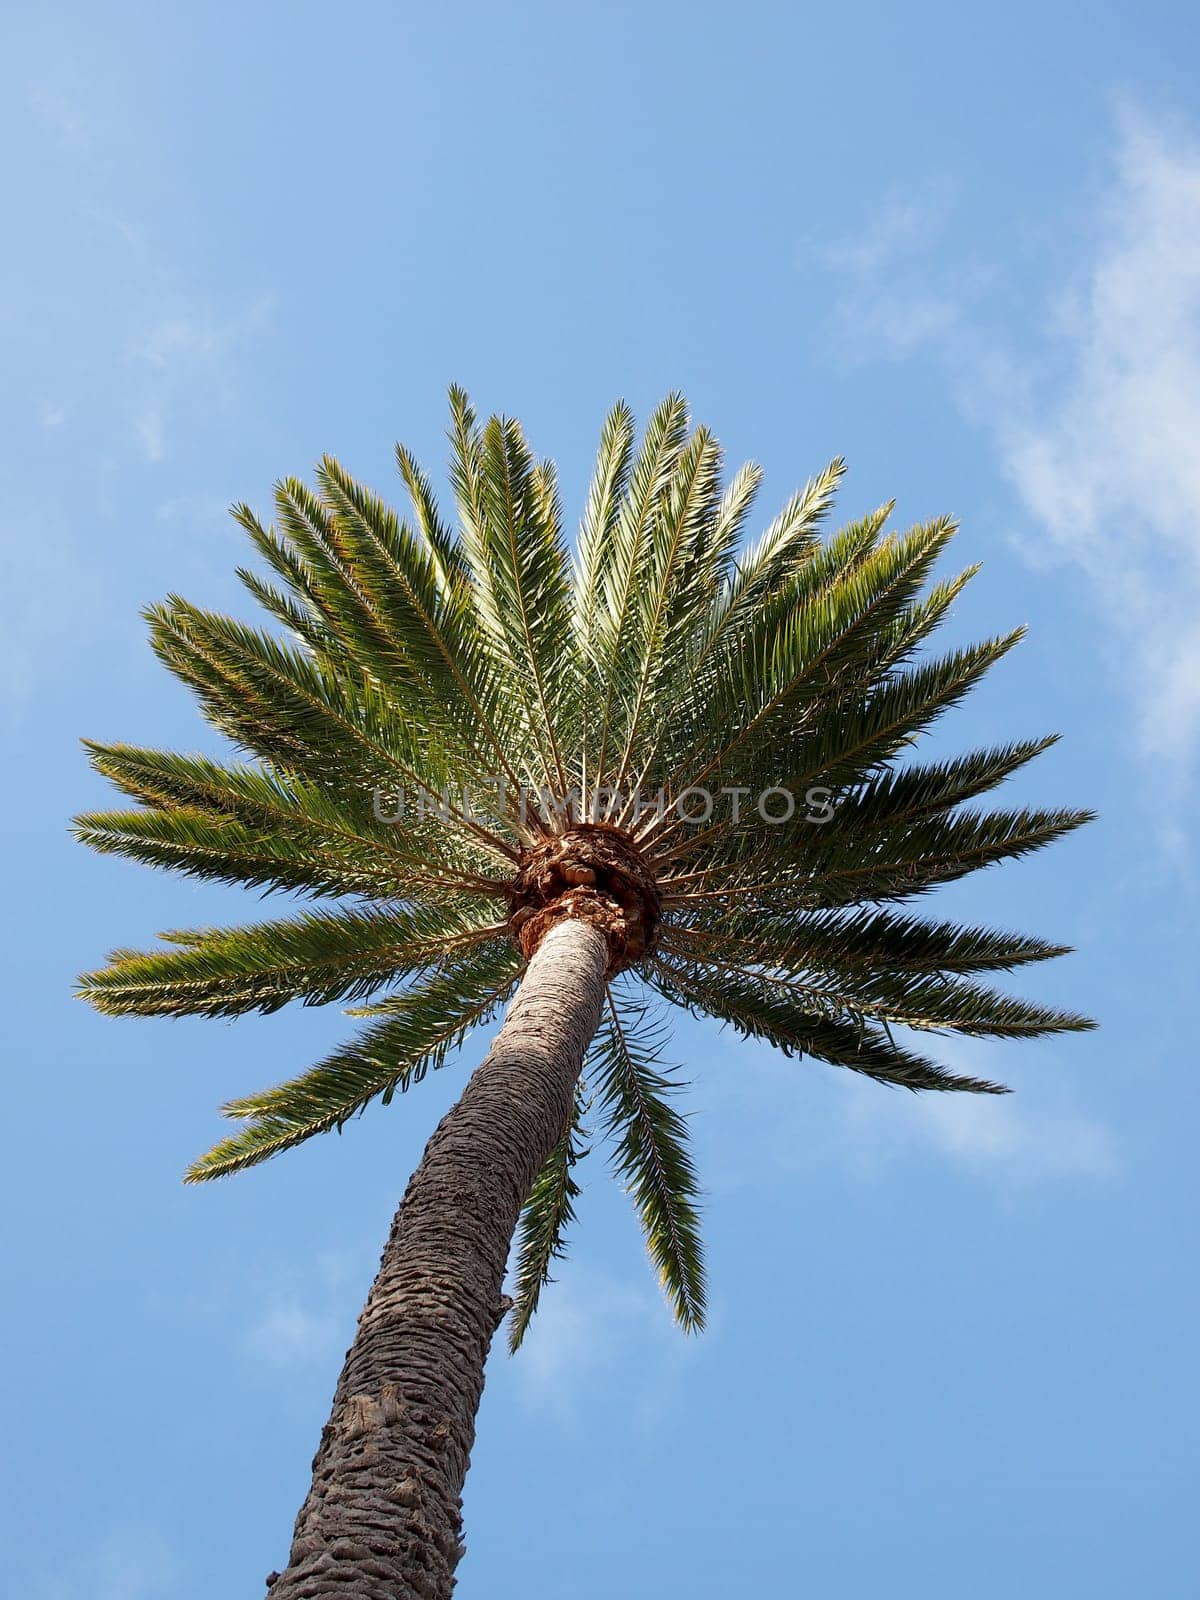 A palm tree reaches towards the sky, its fronds spread out in all directions. The tree trunk is textured and has a slight curve to it. The sky is a clear blue with no clouds. The photo is taken from below, looking up at the tree. The photo creates a sense of tropical warmth and nature.